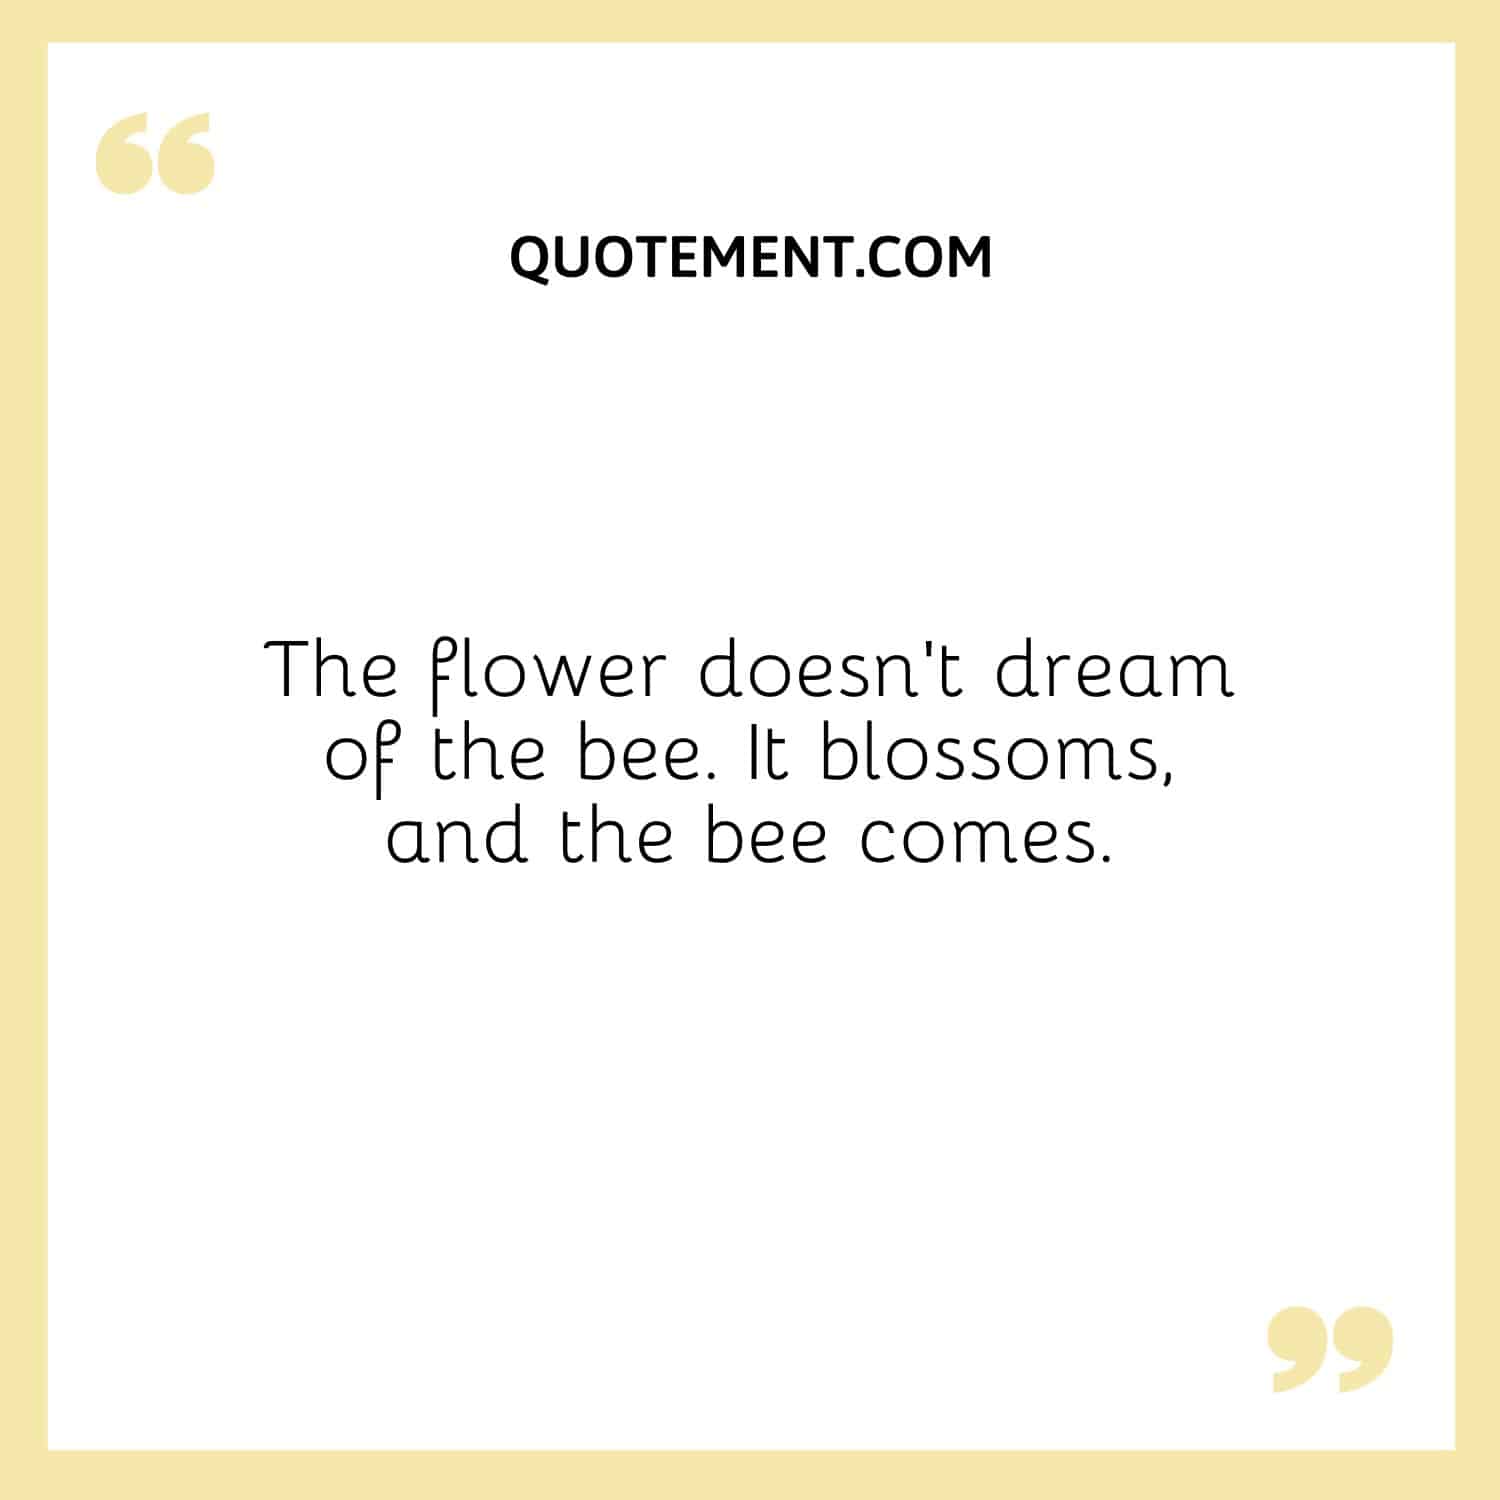 The flower doesn’t dream of the bee. It blossoms, and the bee comes